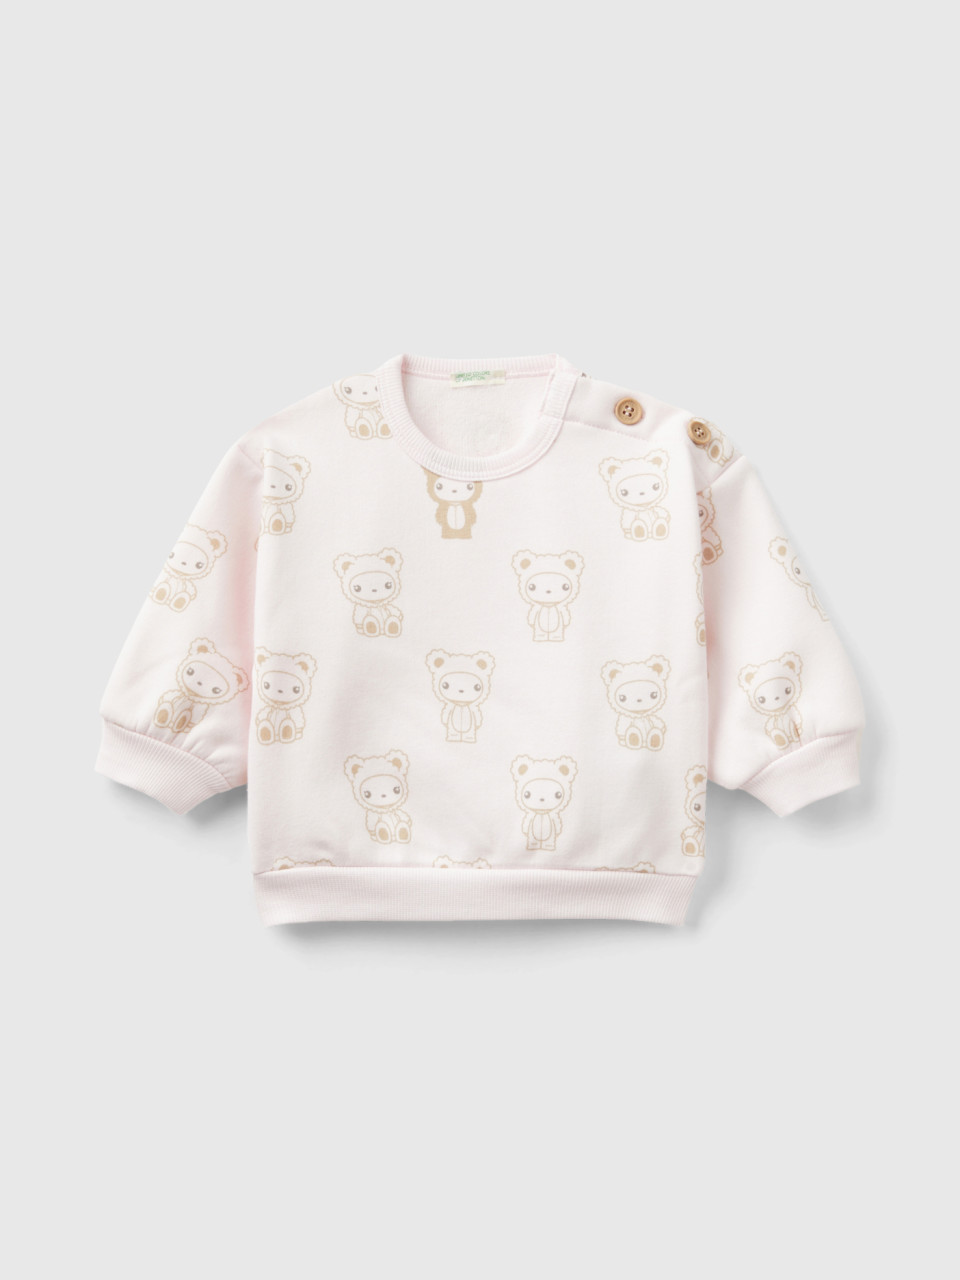 Benetton, Printed Sweatshirt Lined In Chenille, Soft Pink, Kids